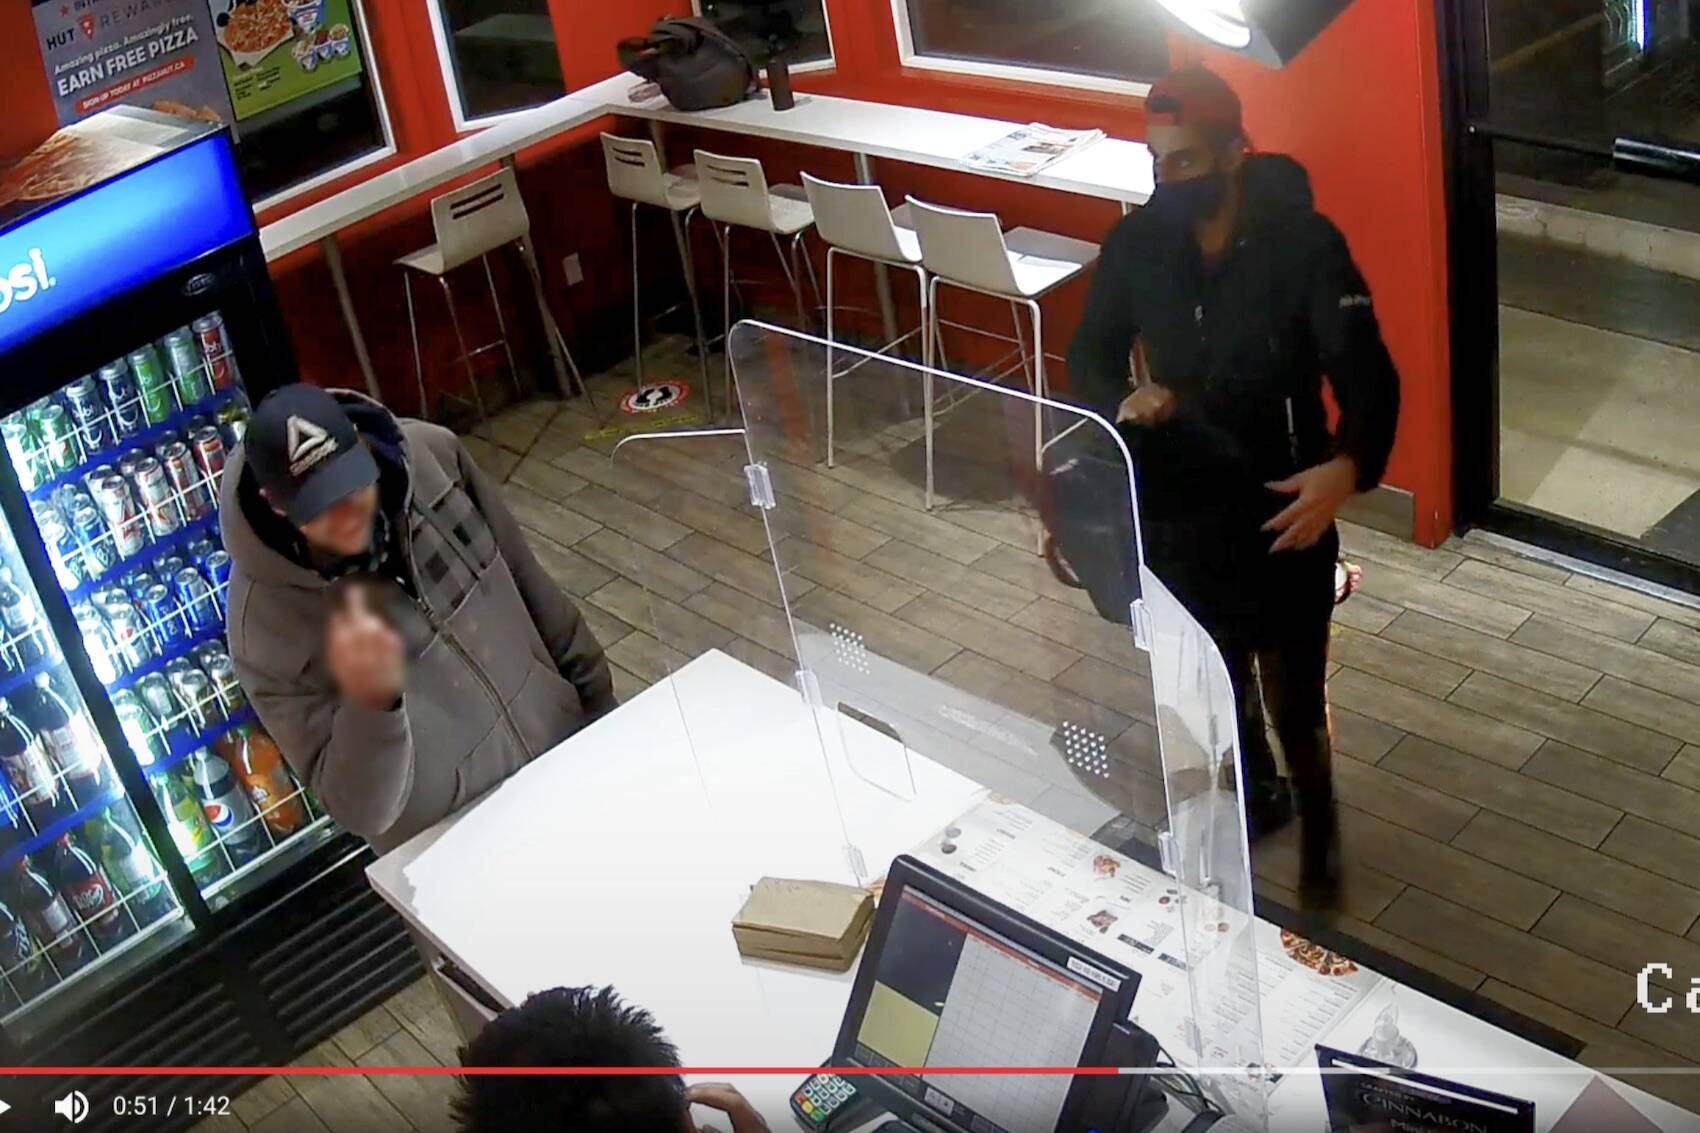 A still from security camera footage shows a man making a rude hand gesture towards a Salmon Arm Pizza Hut employee during an exchange in which racist comments were allegedly made towards the restaurant’s staff Monday night, Nov. 29, 2021. (Contributed)